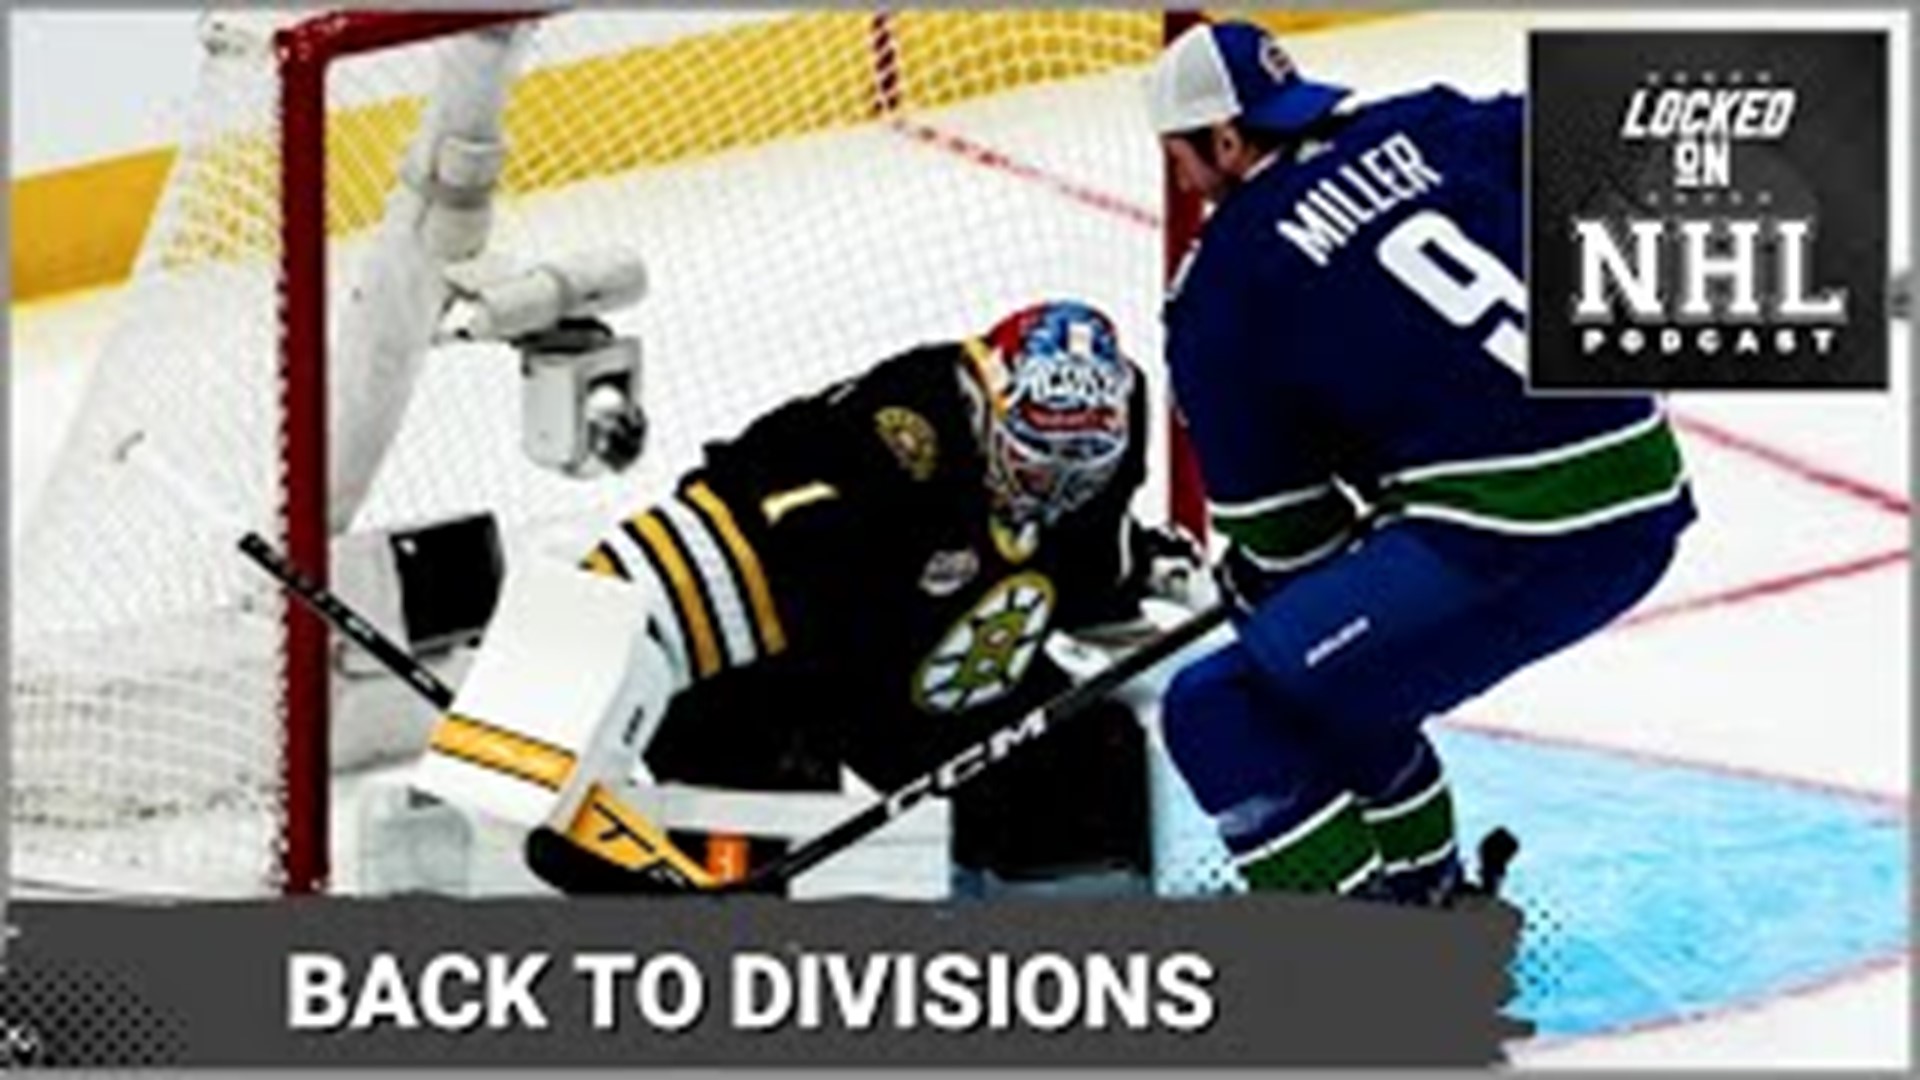 Exiting the all-star break, it's once again time for the locked on NHL power rankings. Bouncing around all 4 of the NHL's divisions, there are movers like the Bruins